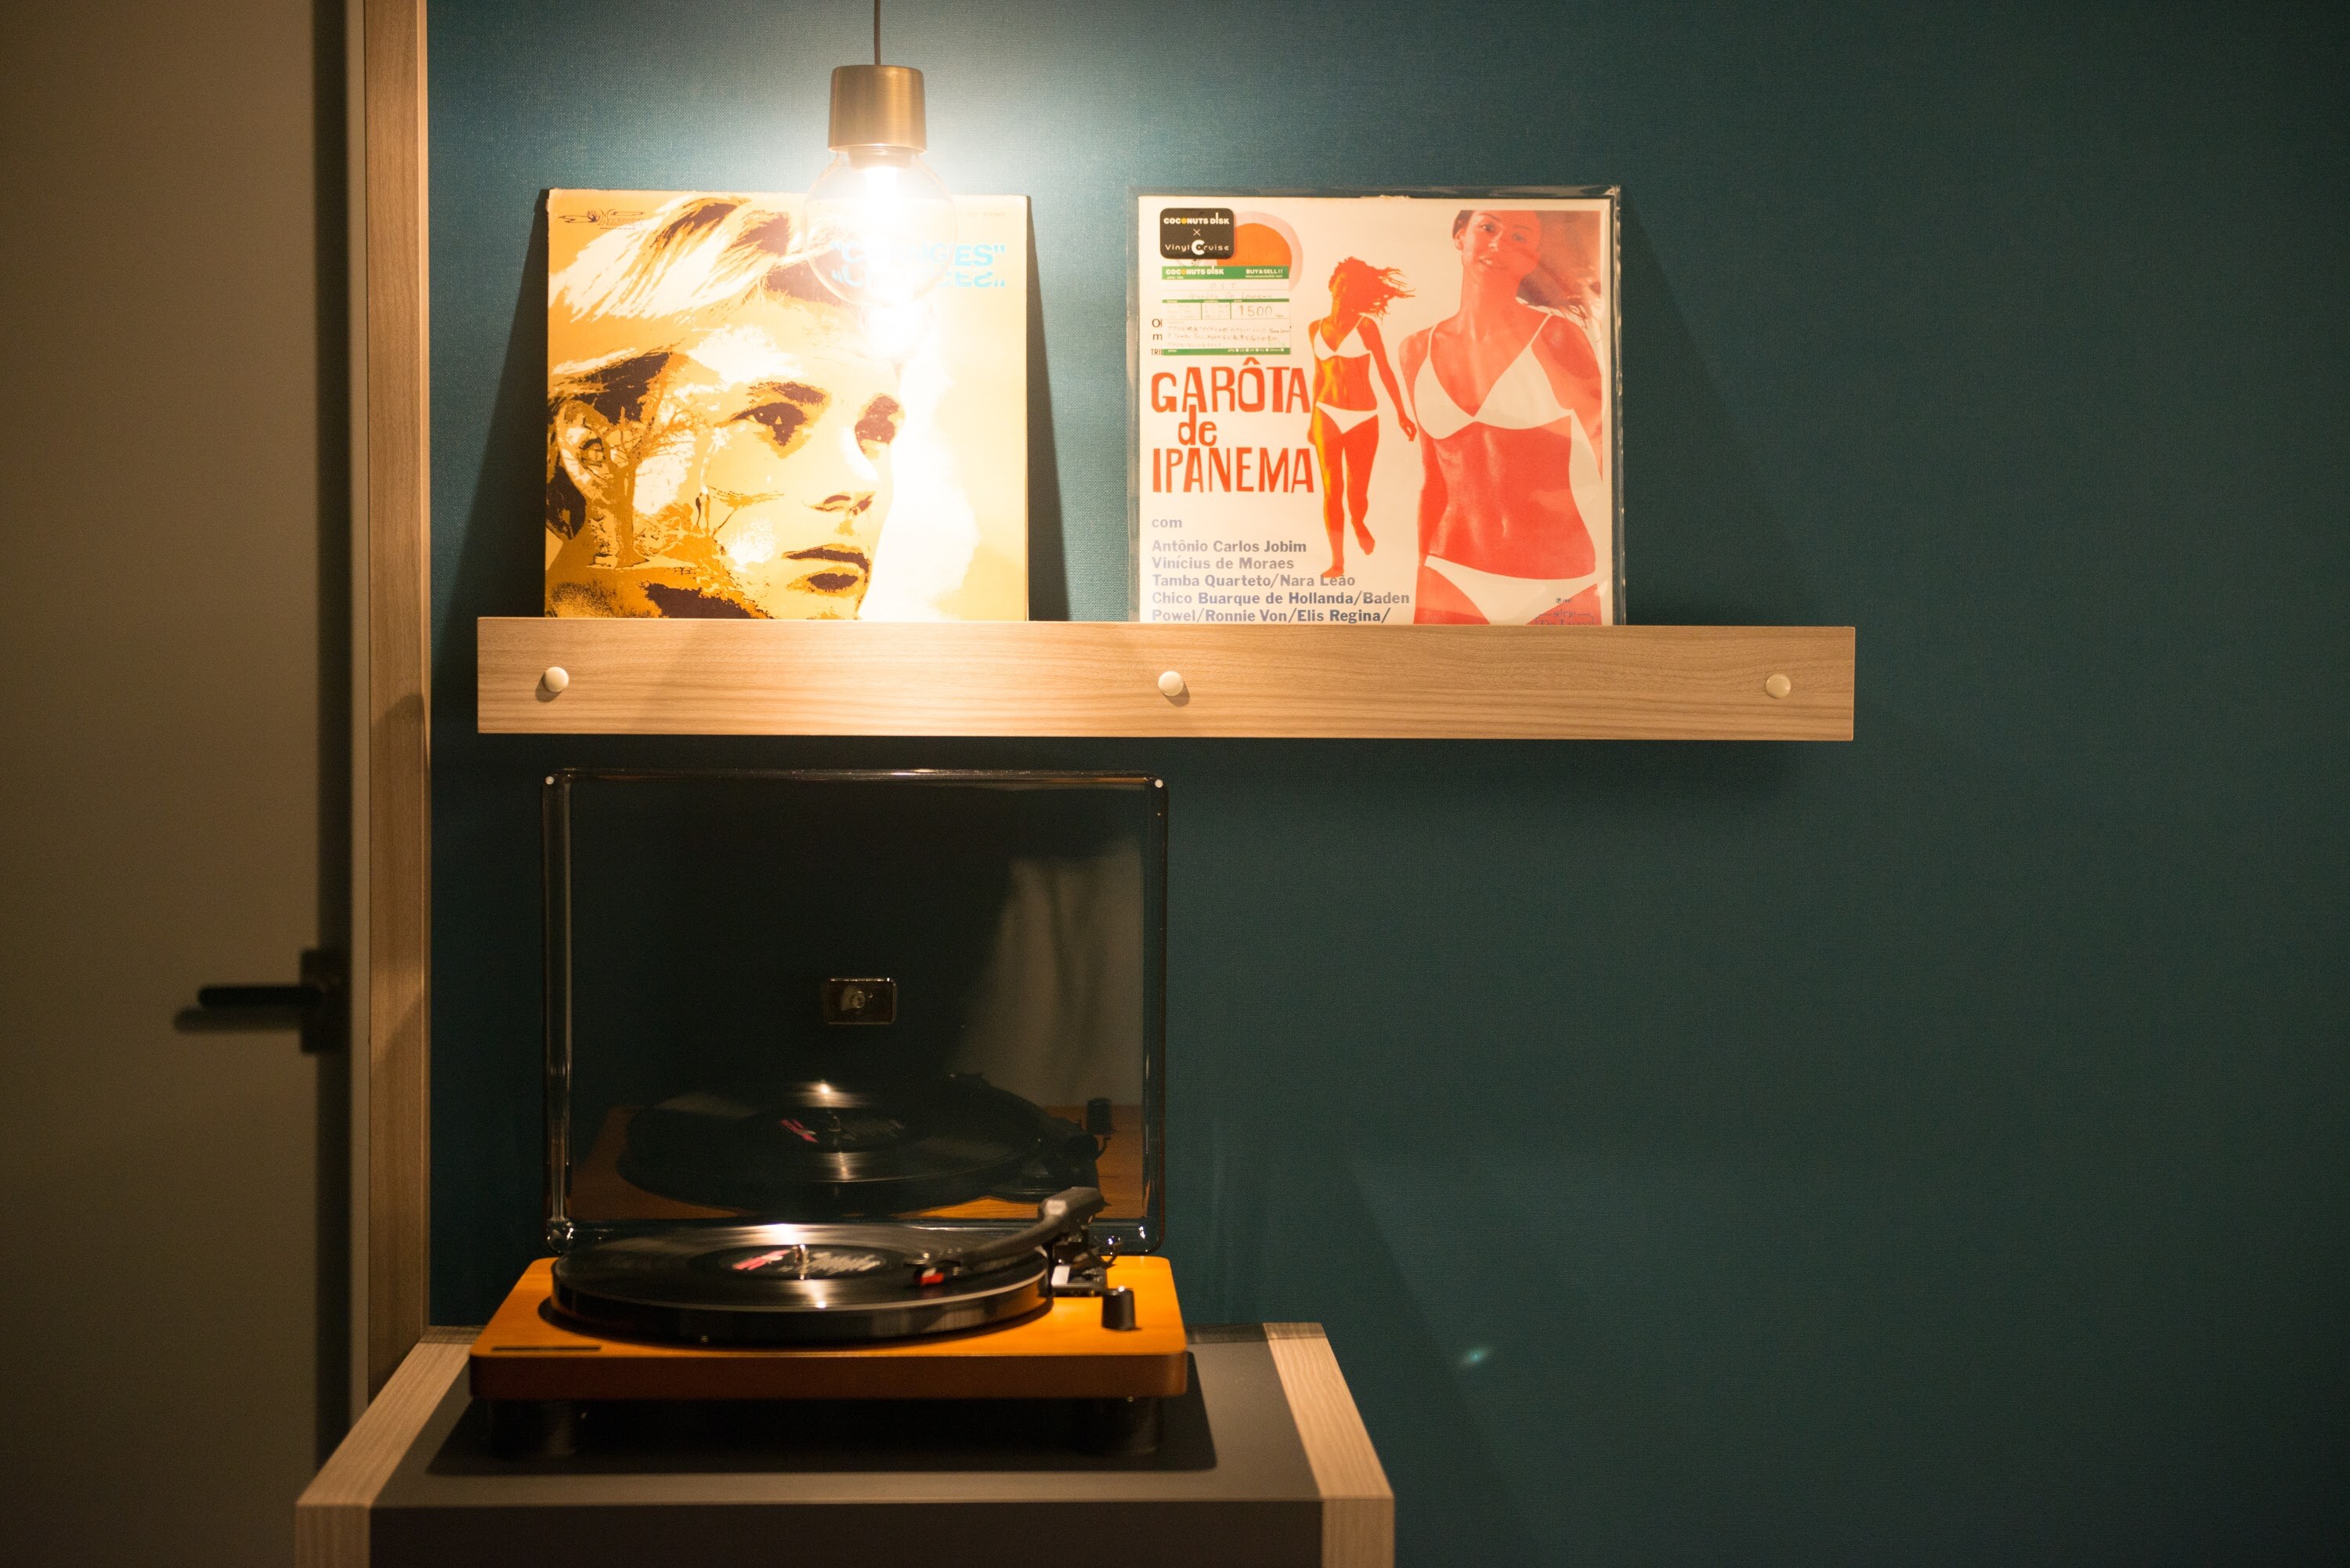 All rooms are equipped with record players and records